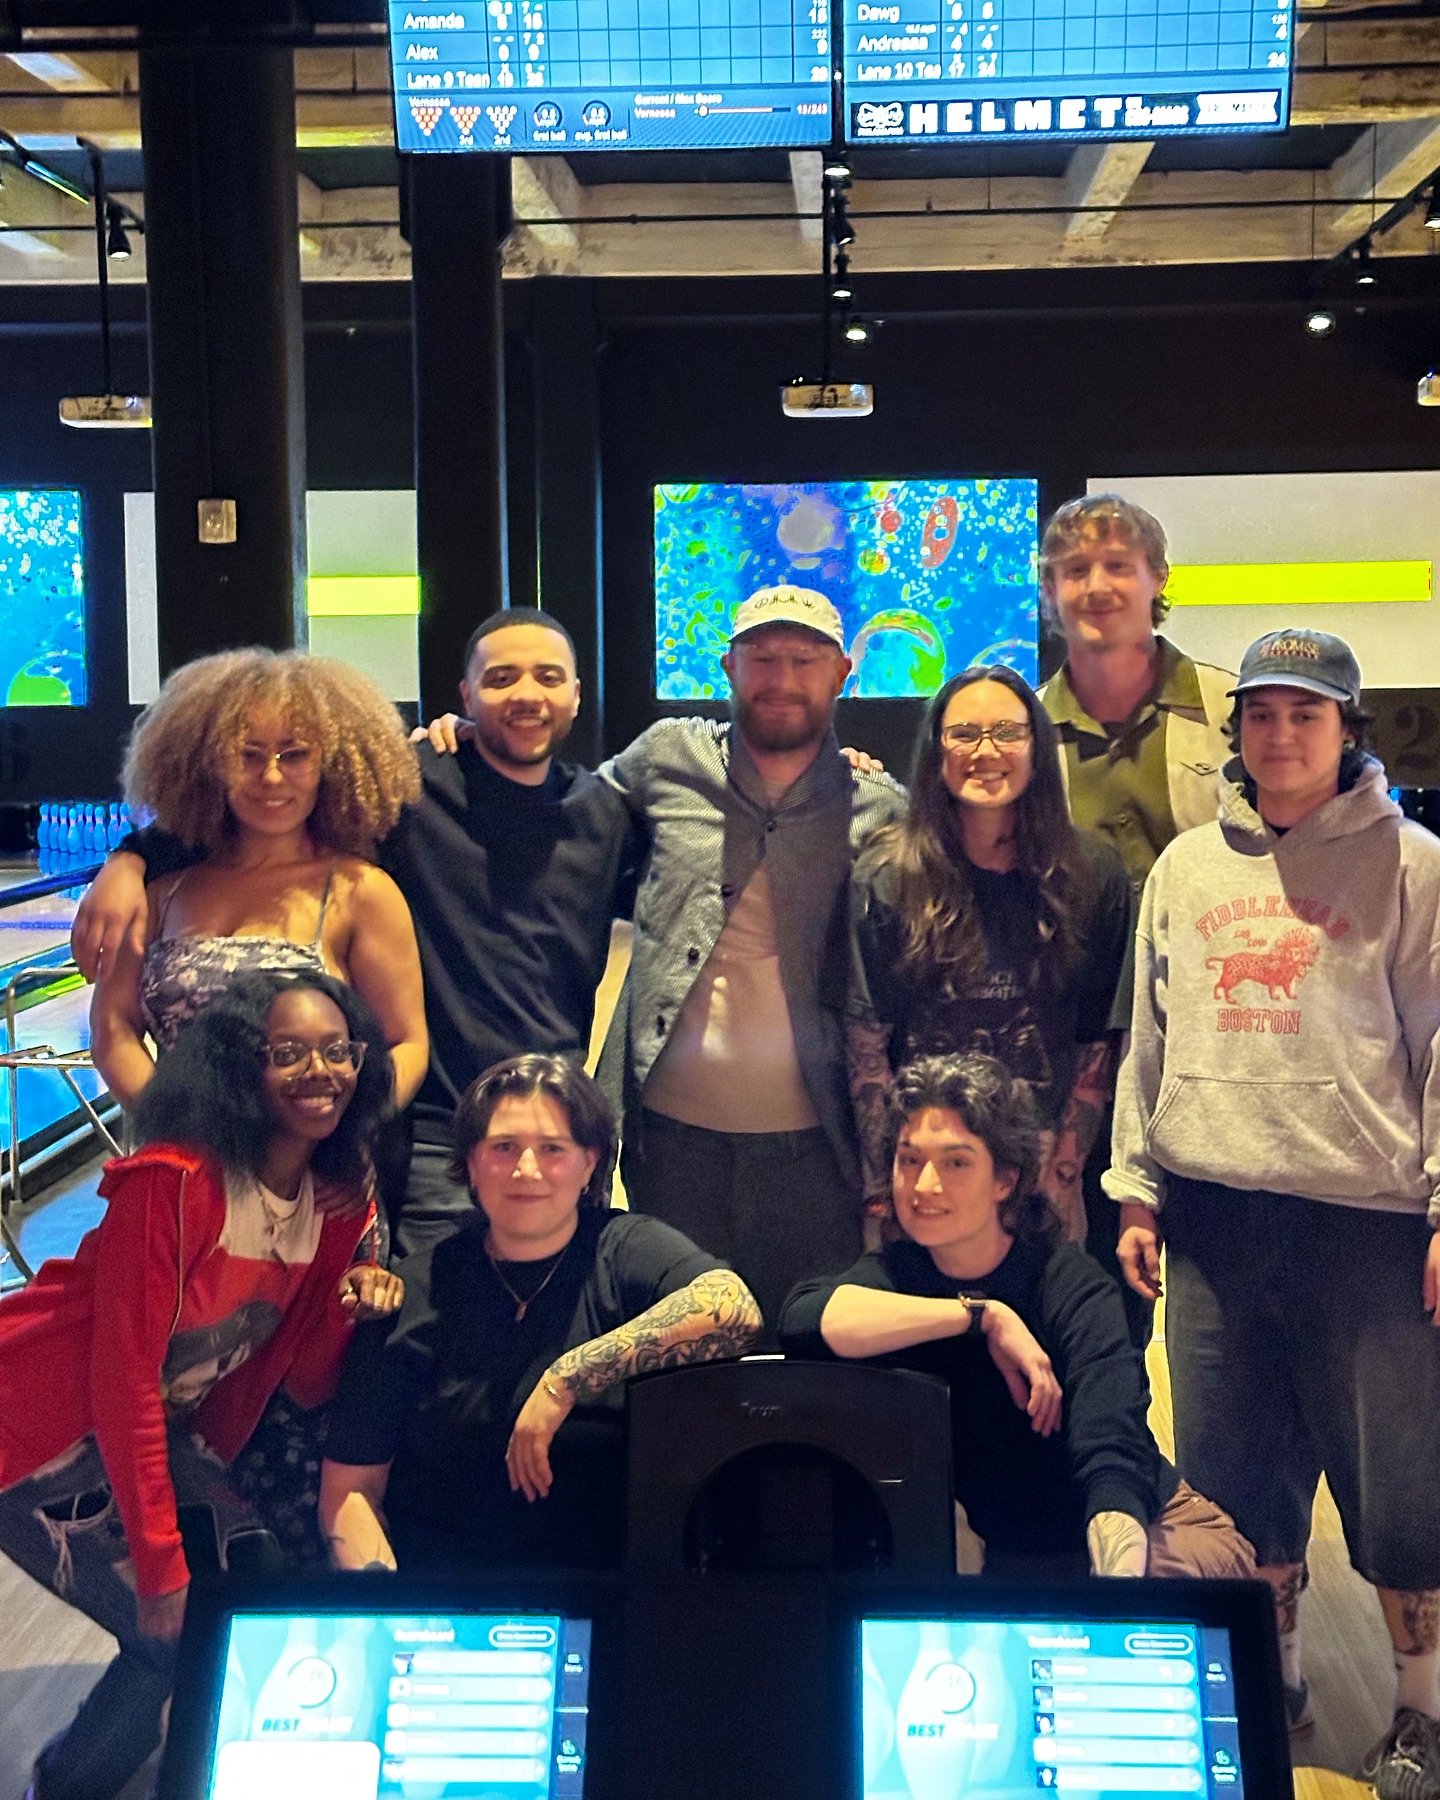 If you view other barbers in your area as business competition&hellip; then you&rsquo;re doing it wrong. 

So we and @winsomeforgood had the idea to get our teams together to hang out and bowl @bbowlphilly. We did this not only to introduce everyone 